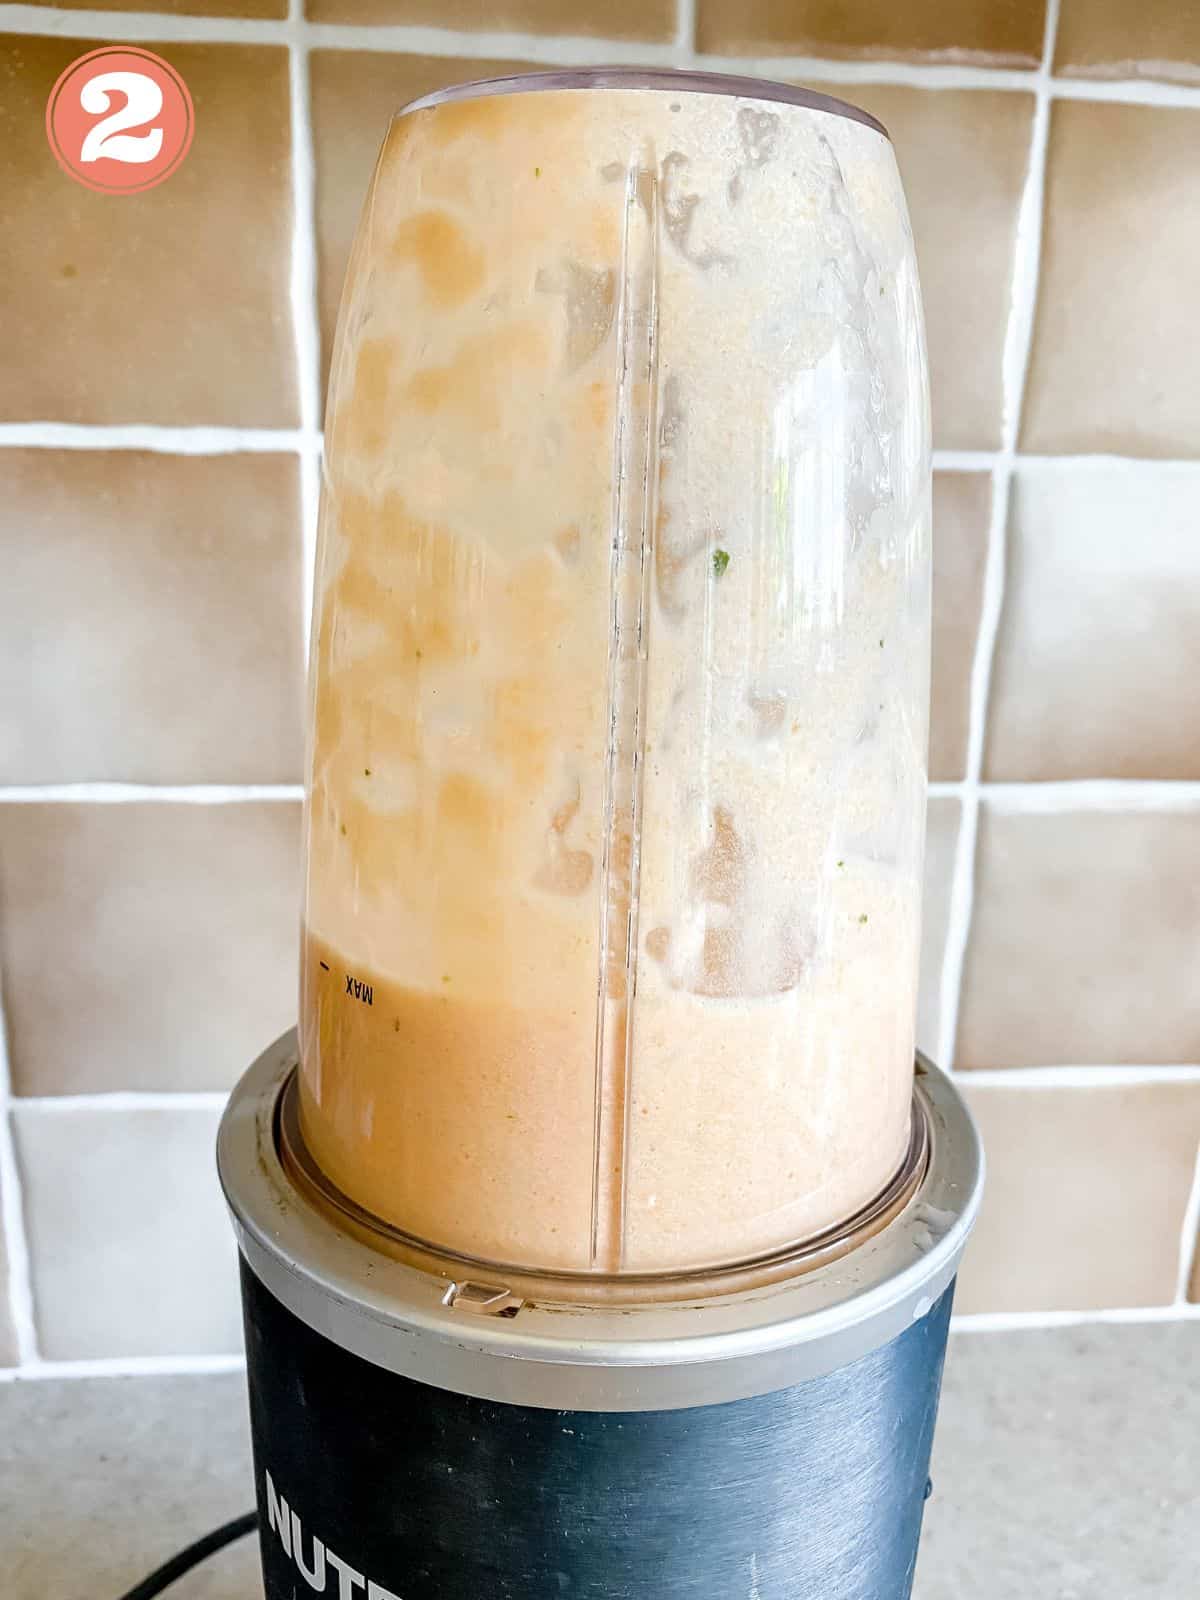 melon in a blender labelled number two.